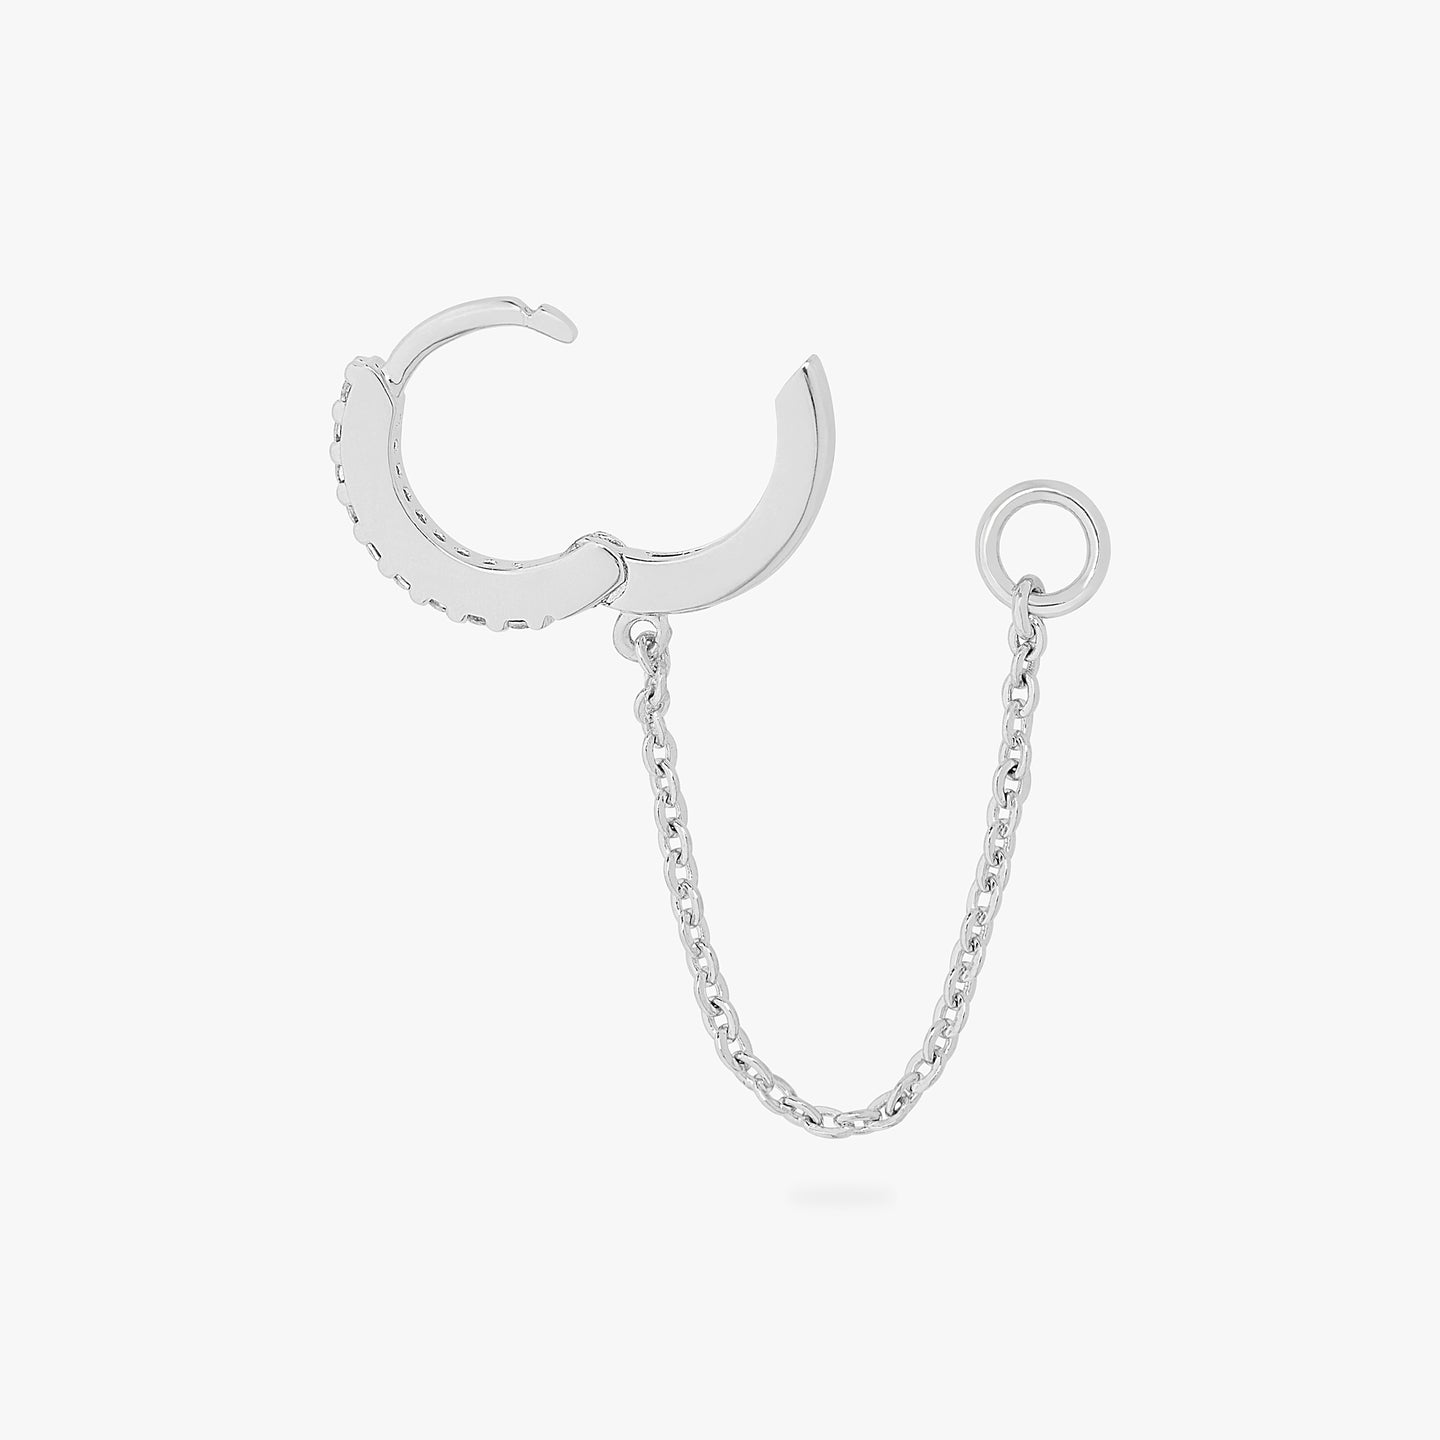 An image of a silver/clear mini pave huggie with a connector chain to an open 4mm wide jump ring unhinged. color:null|silver/clear